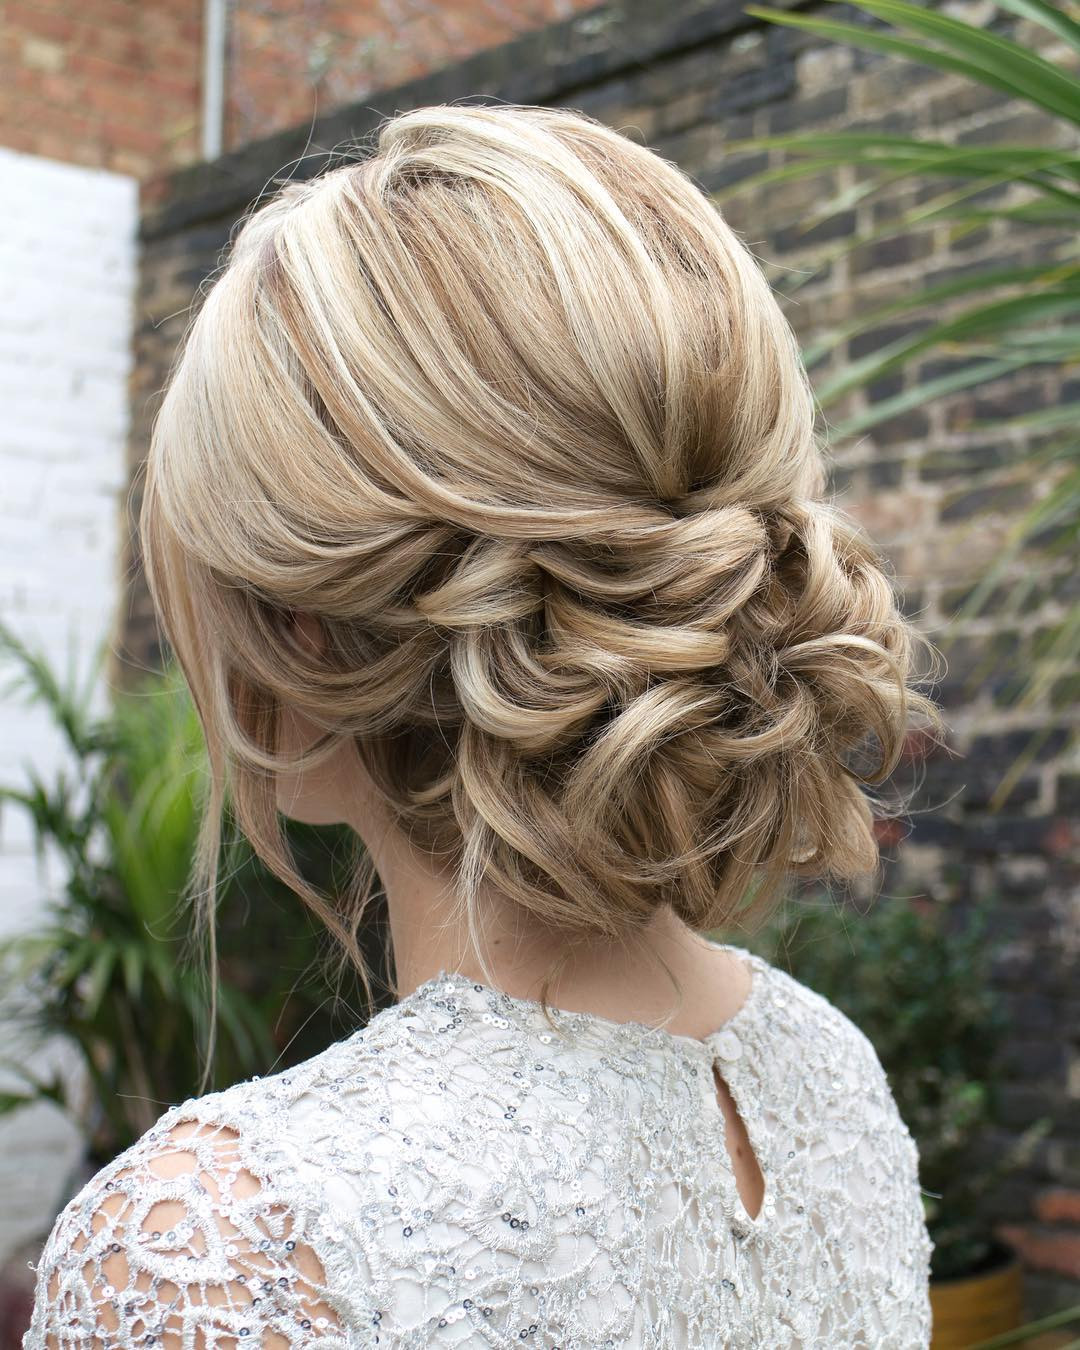 Prom Hairstyle Updo
 10 Gorgeous Prom Updos for Long Hair Prom Updo Hairstyles